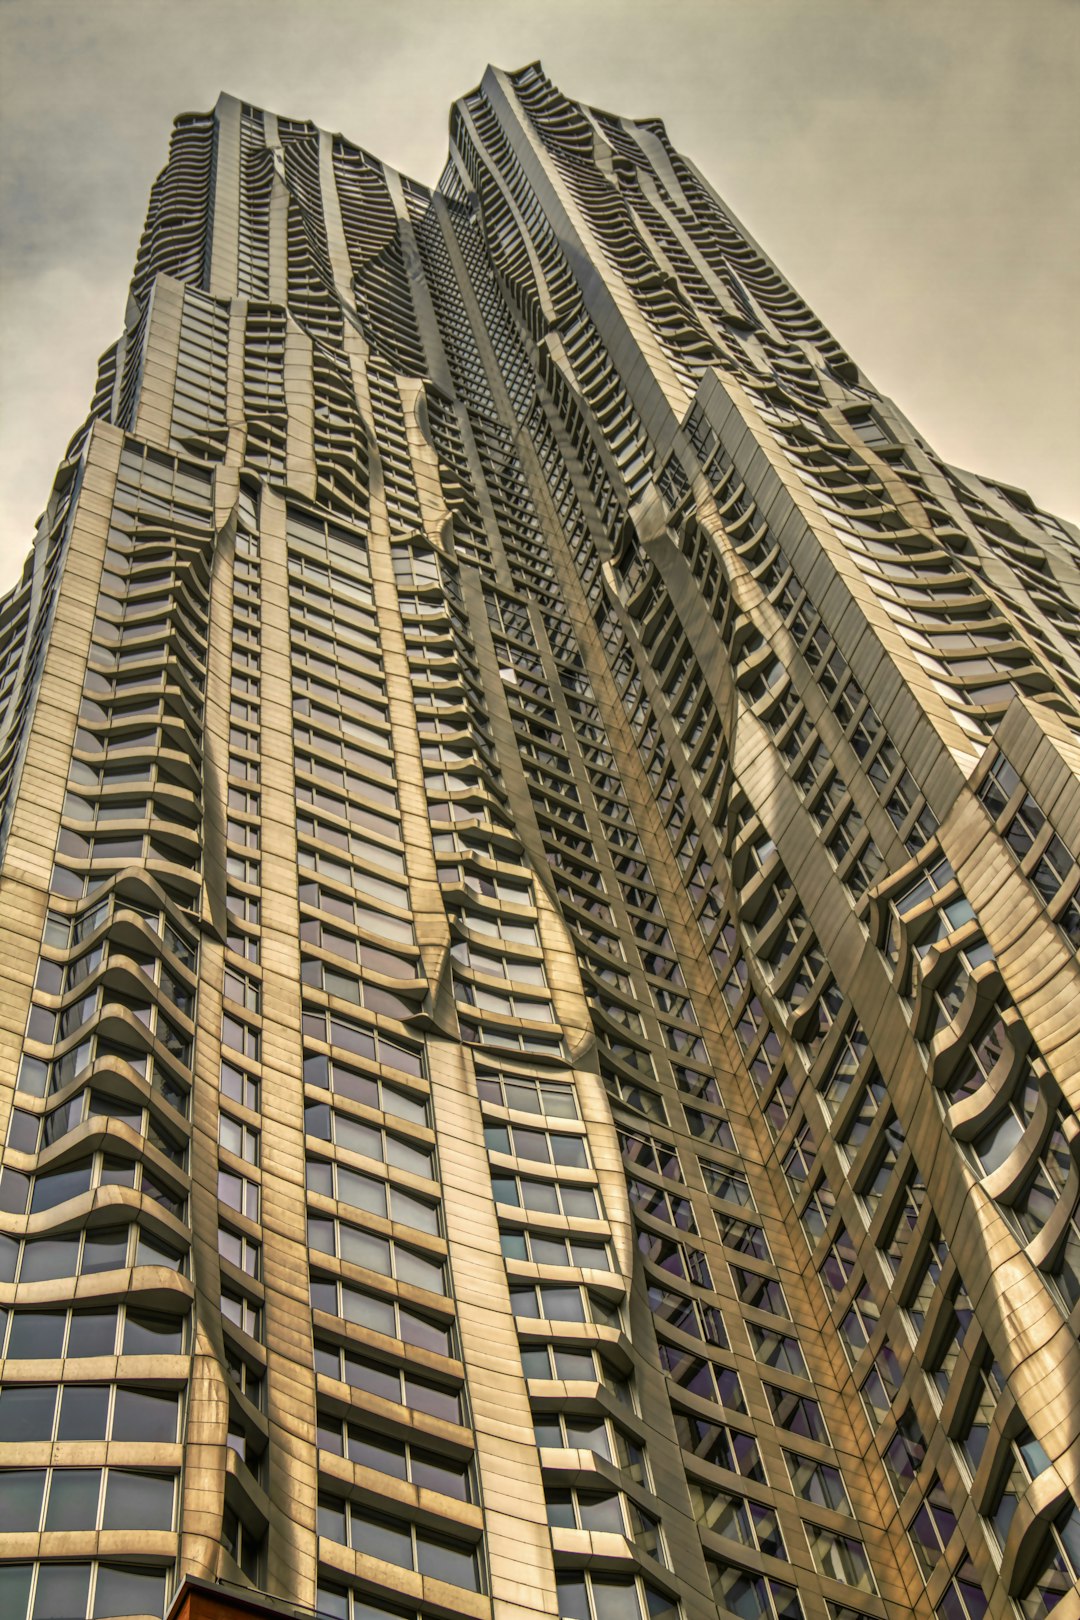 low angle photography of high rise building